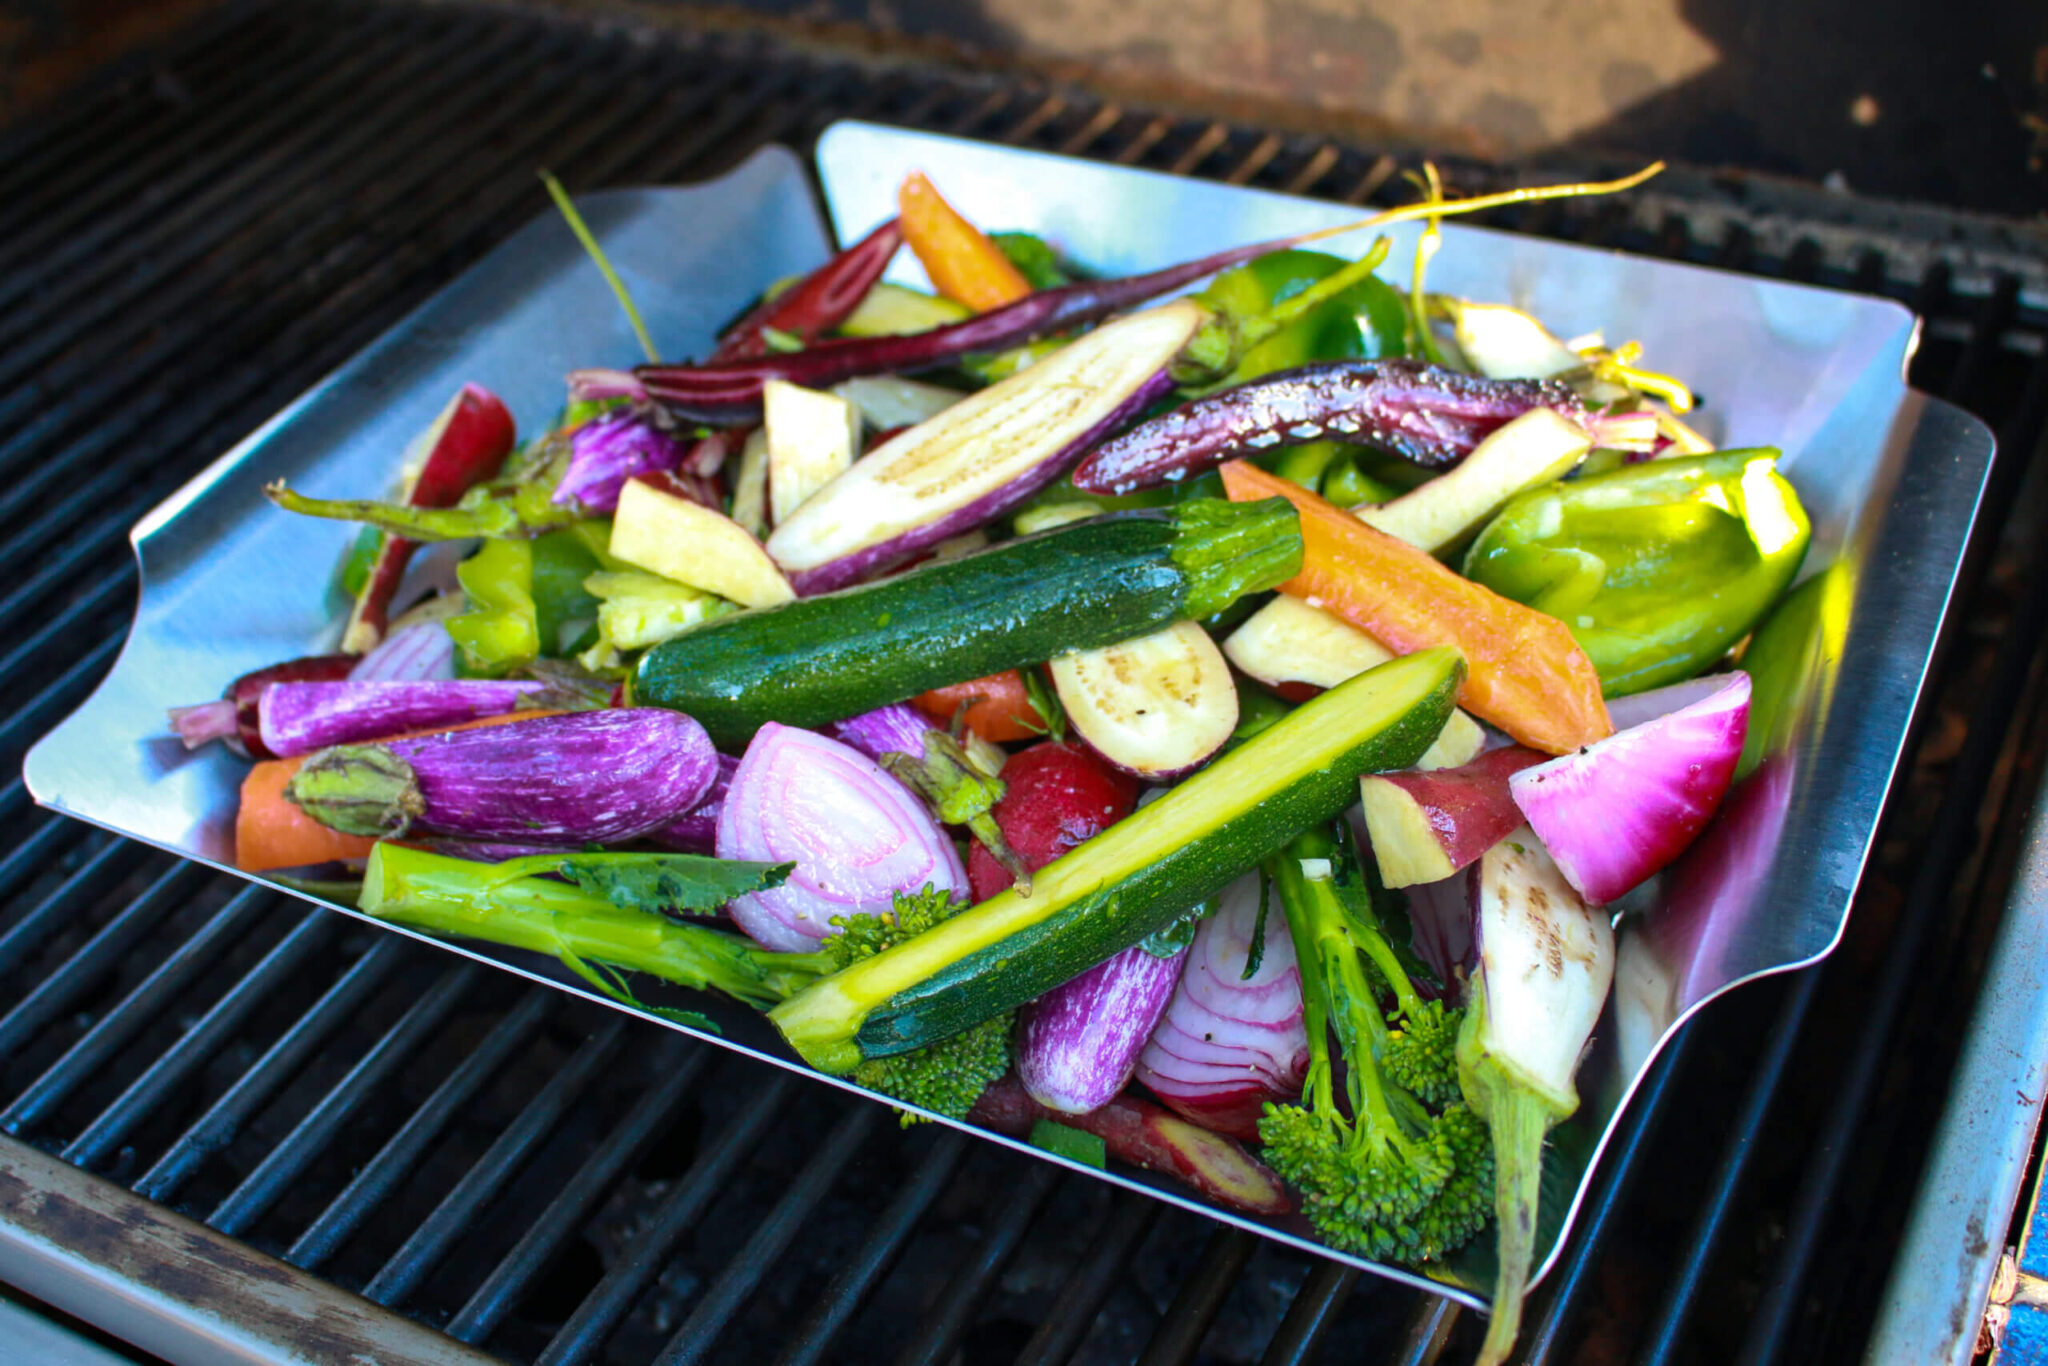 https://eadn-wc02-3894996.nxedge.io/wp-content/uploads/2019/04/grilled-vegetables-11-scaled.jpg